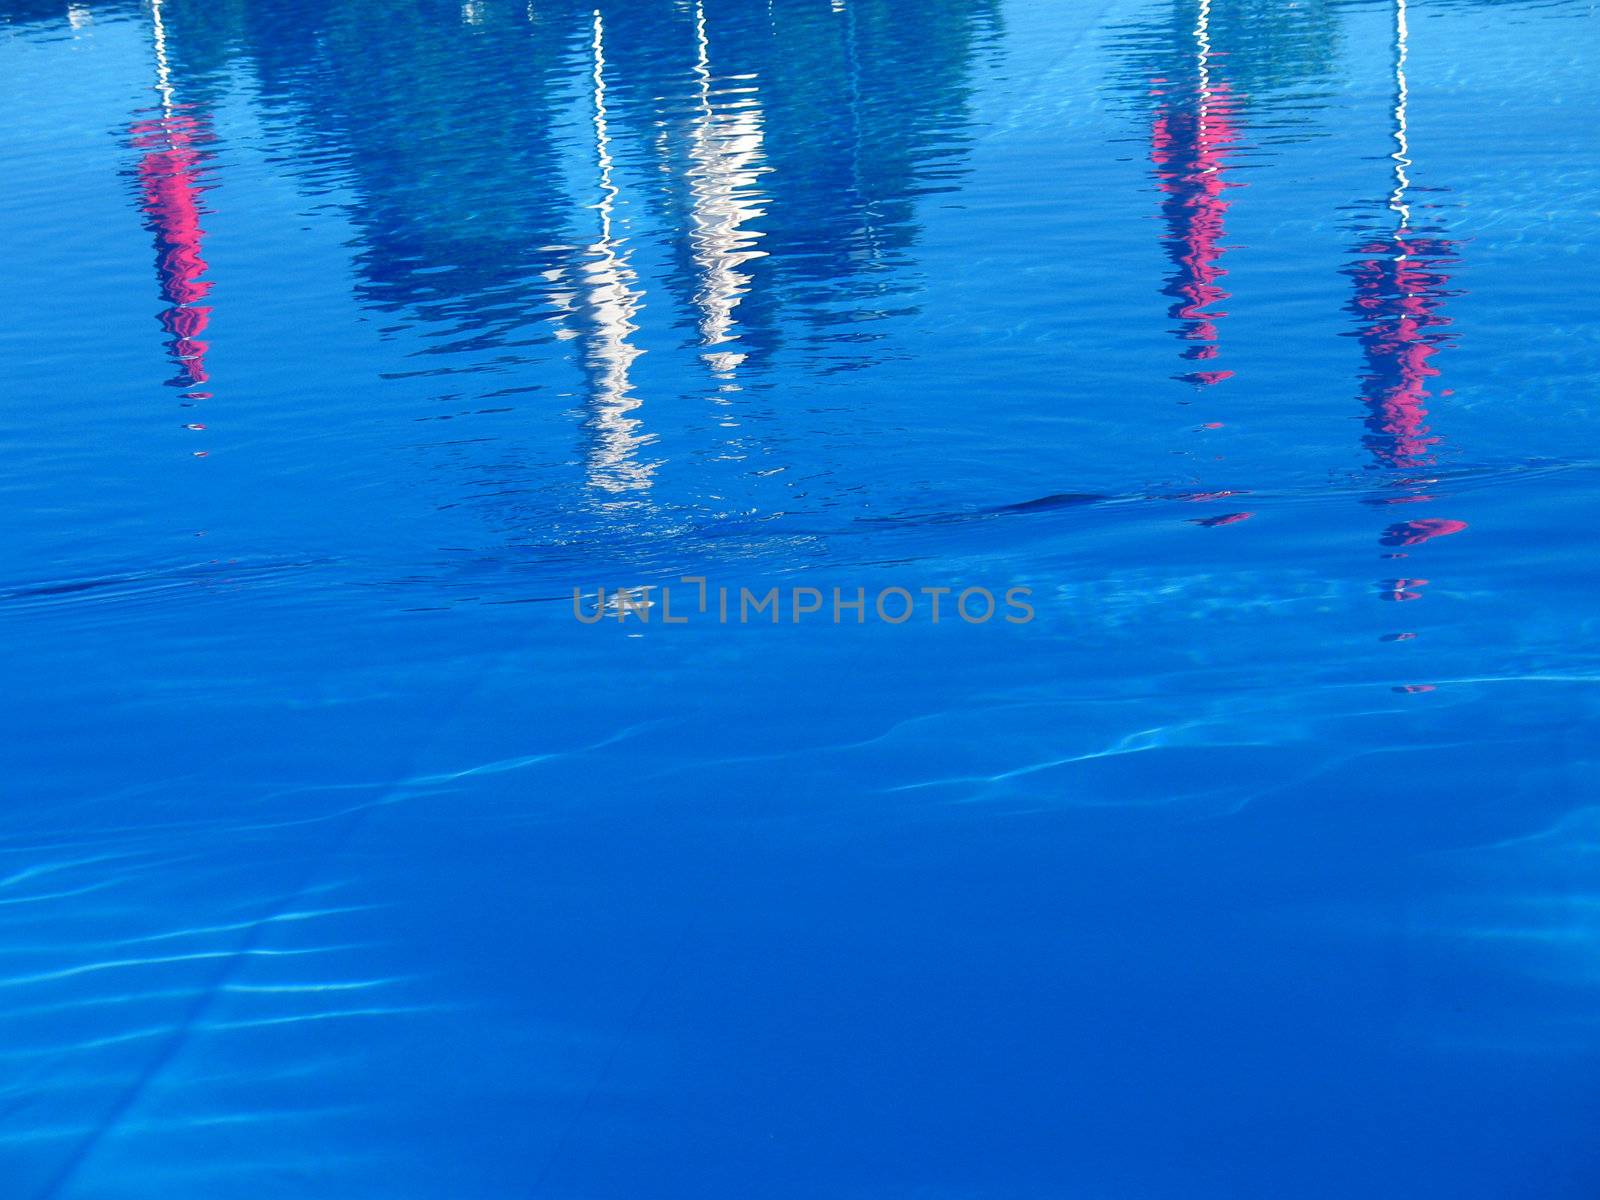 red and white umbrellas reflected in pool water